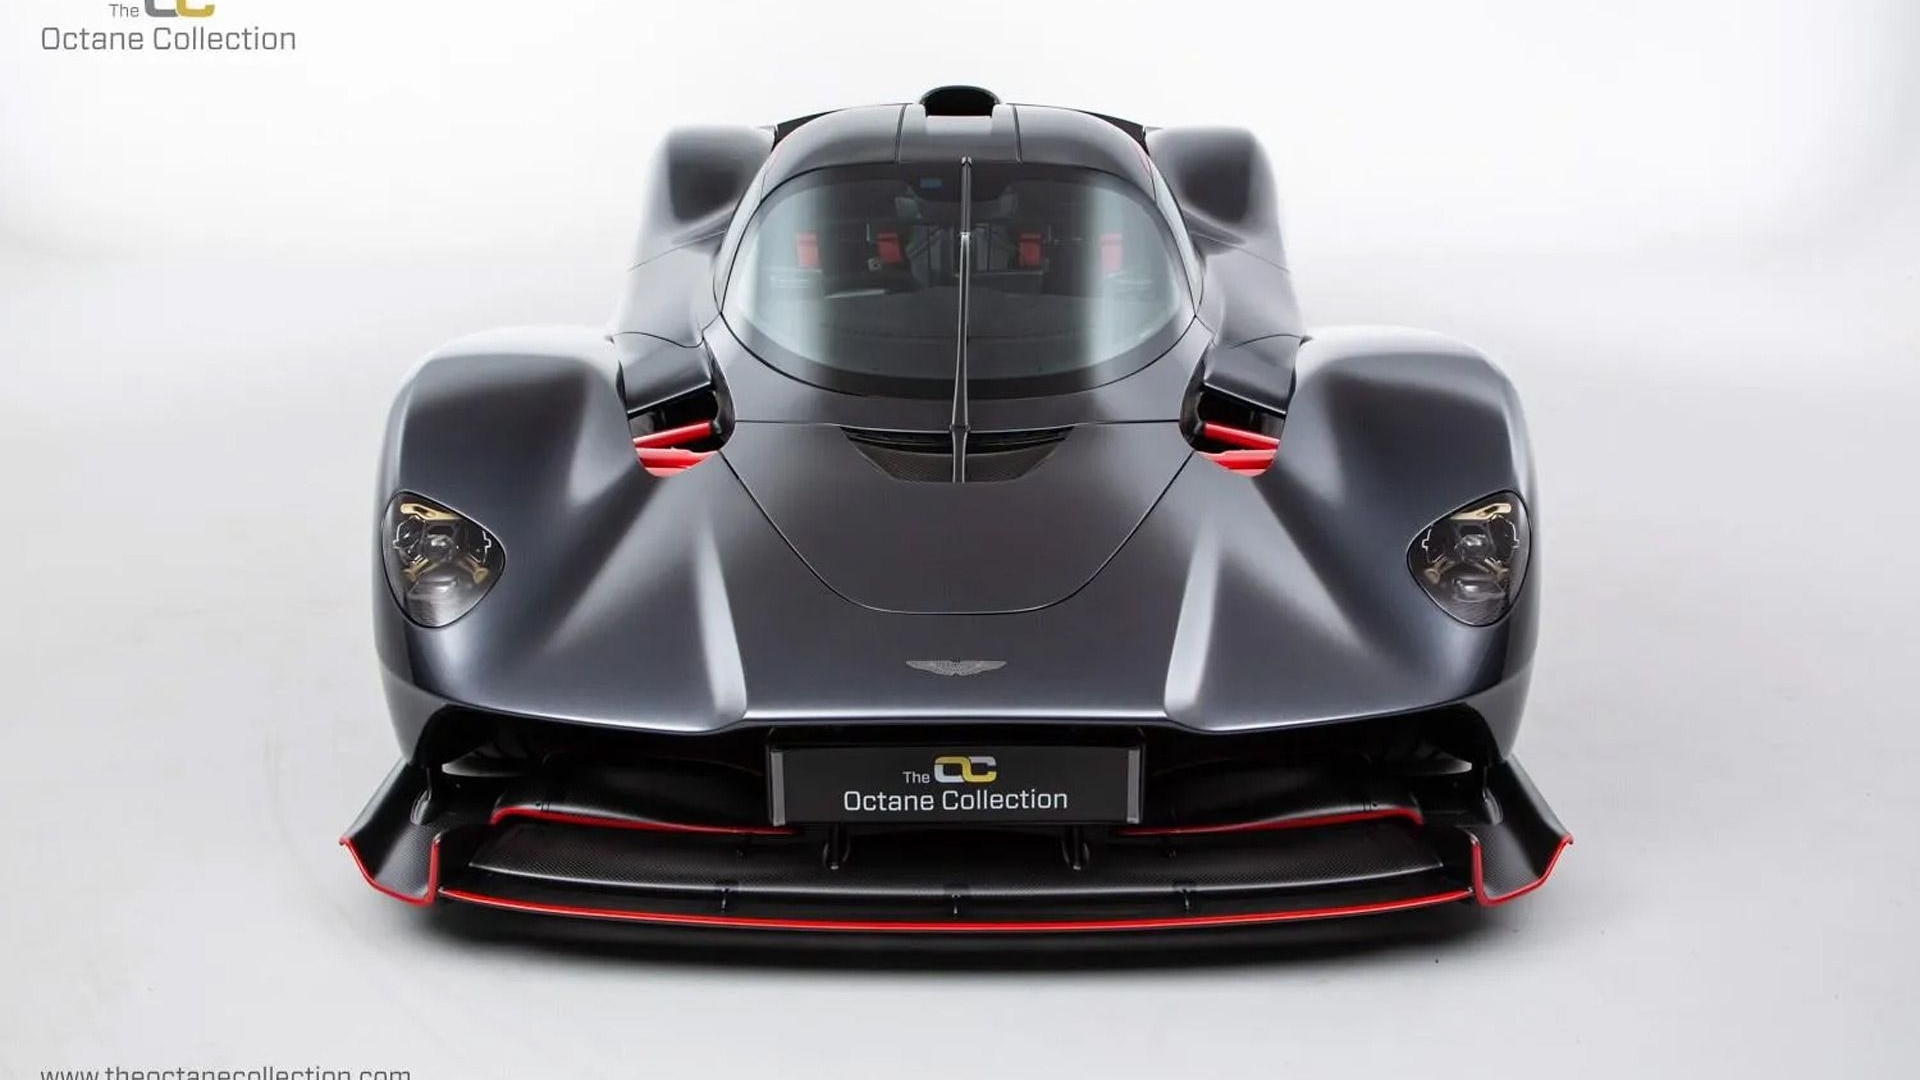 Aston Martin Valkyrie - Photo credit: The Octane Collection